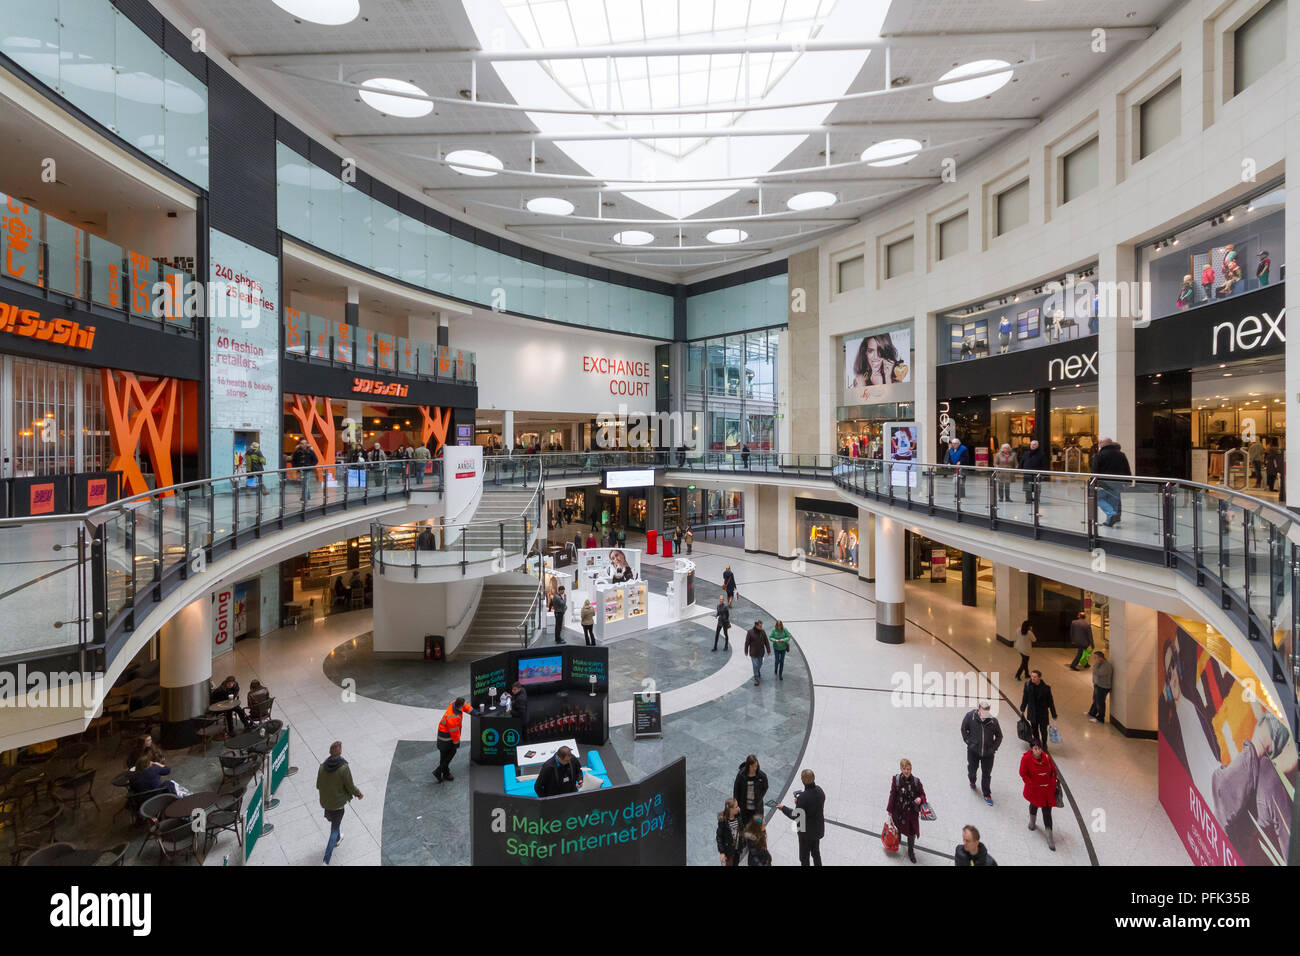 All'interno del Manchester Arndale Shopping Centre a Manchester in Inghilterra. Foto Stock